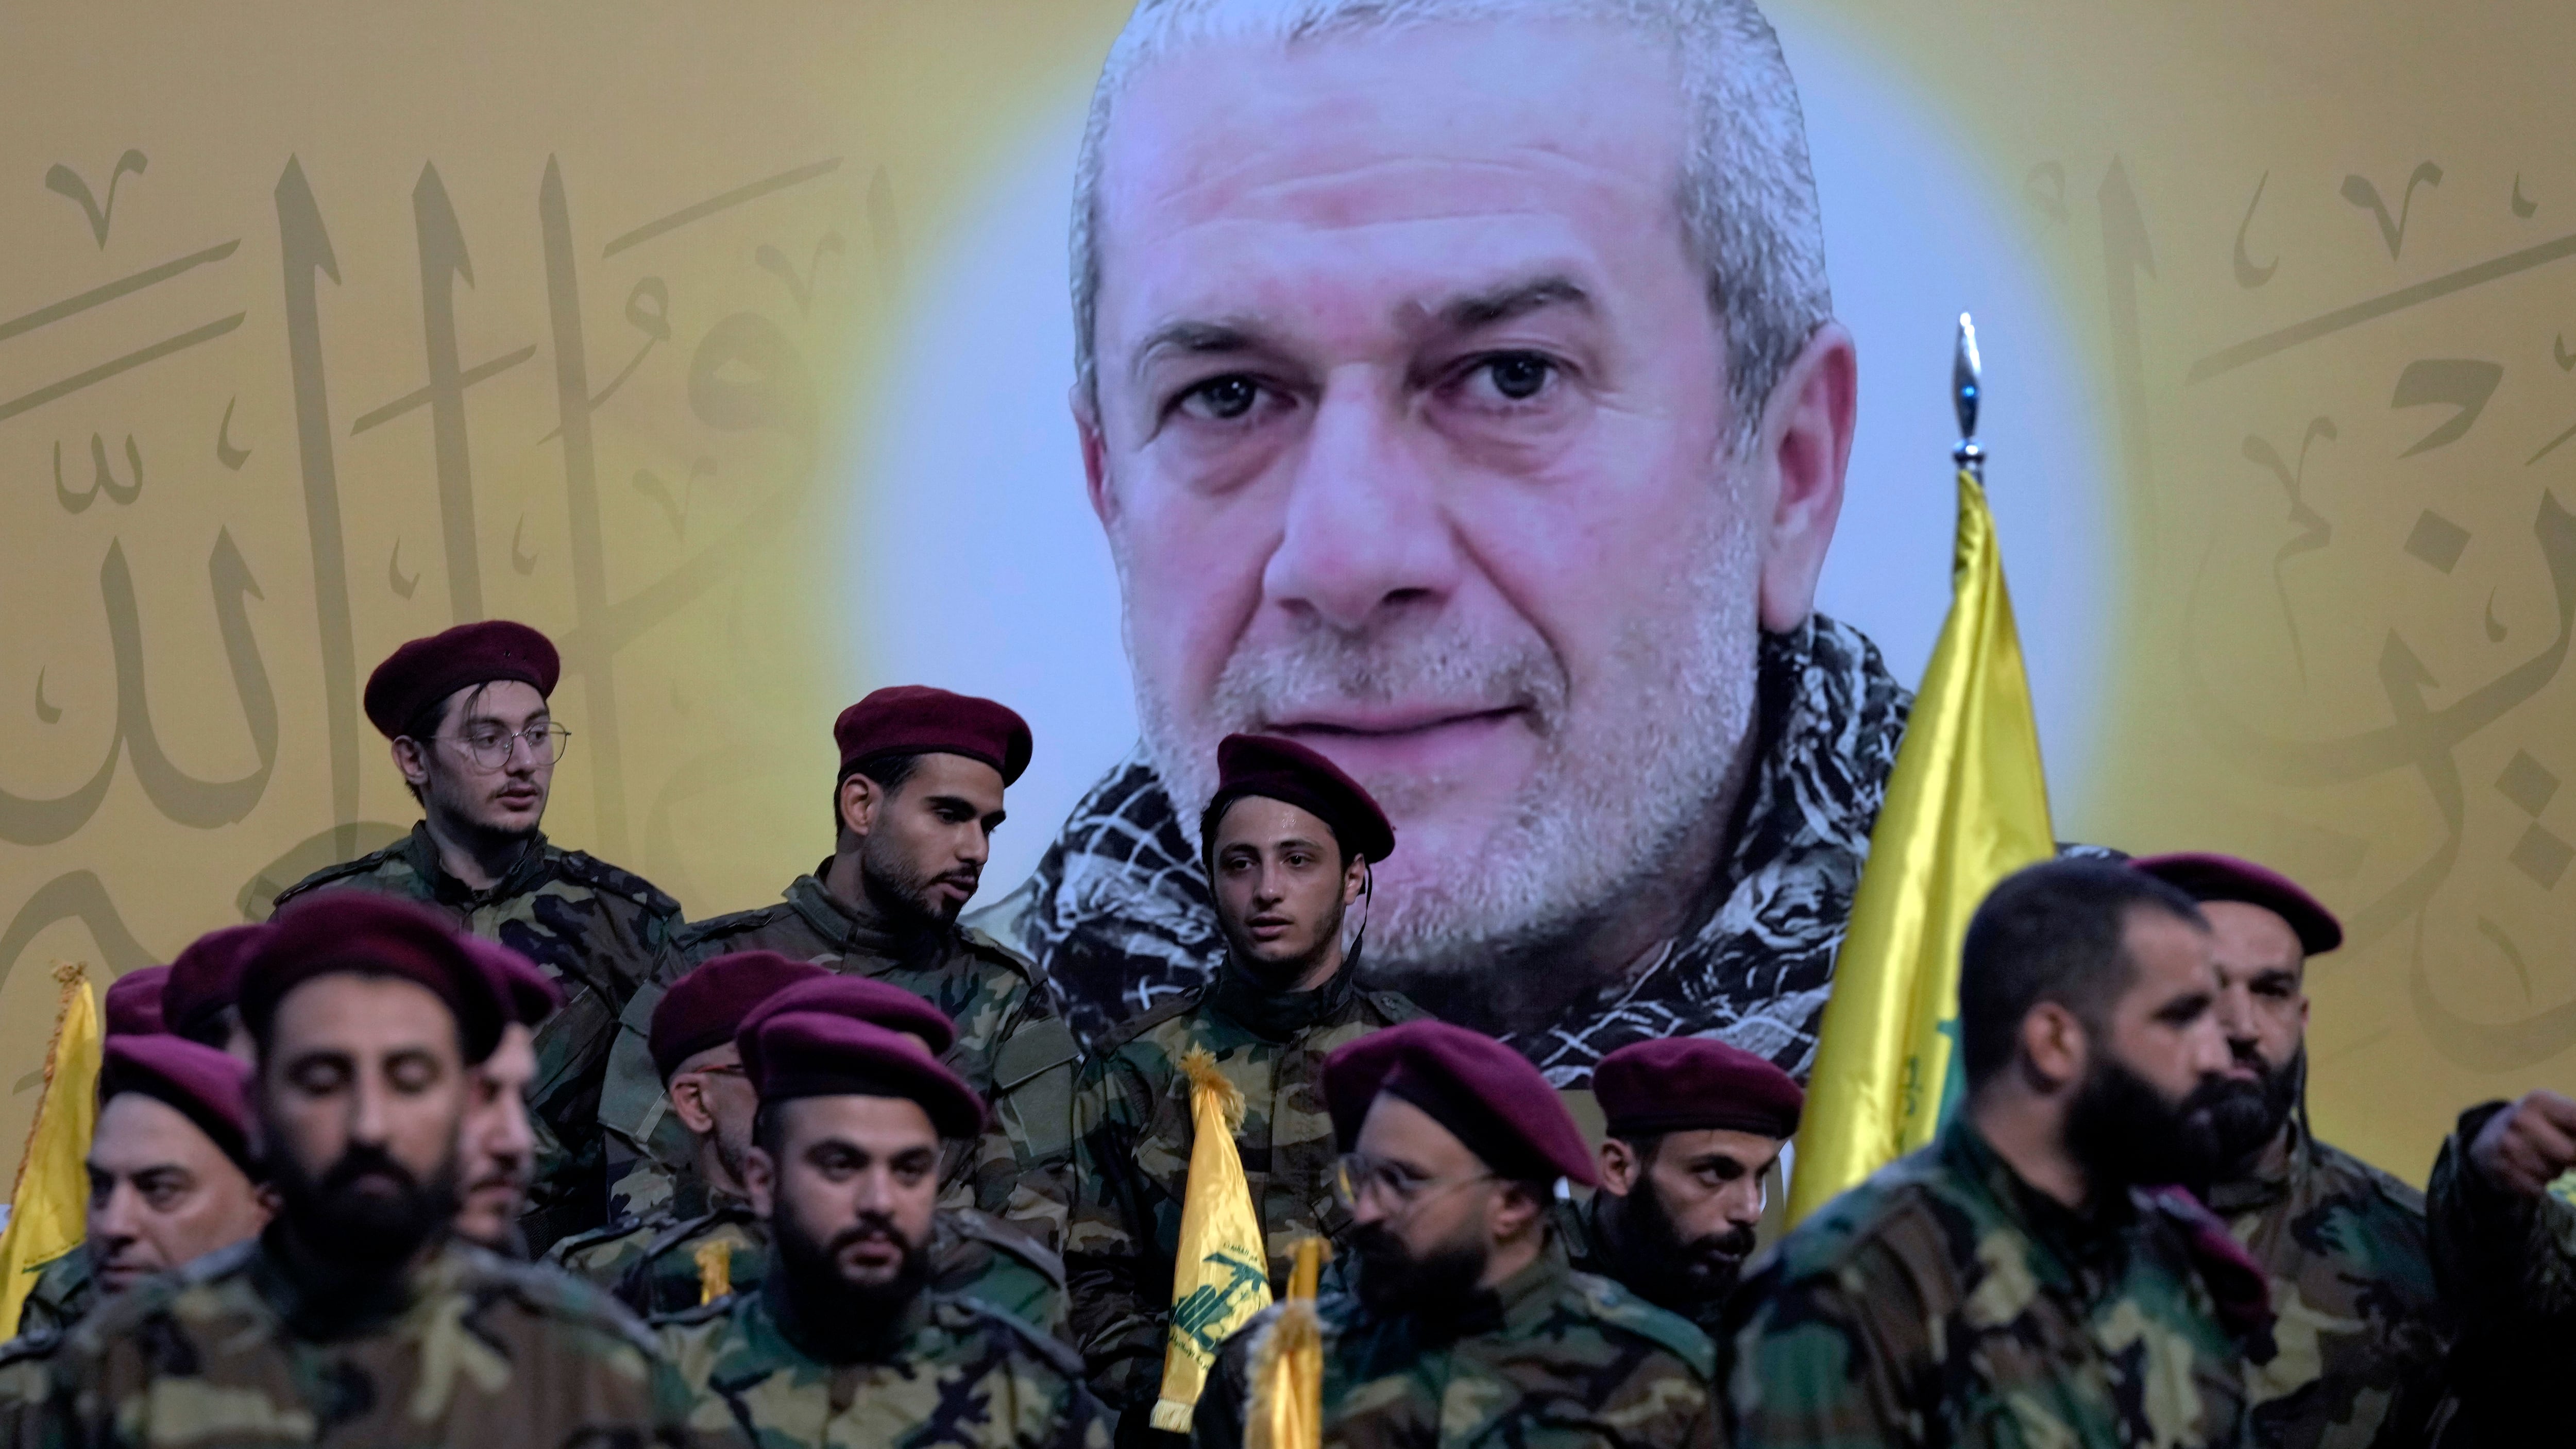 Mohammad Naameh Nasser, a Hezbollah commander, was killed by an Israeli airstrike (AP Photo/Bilal Hussein)